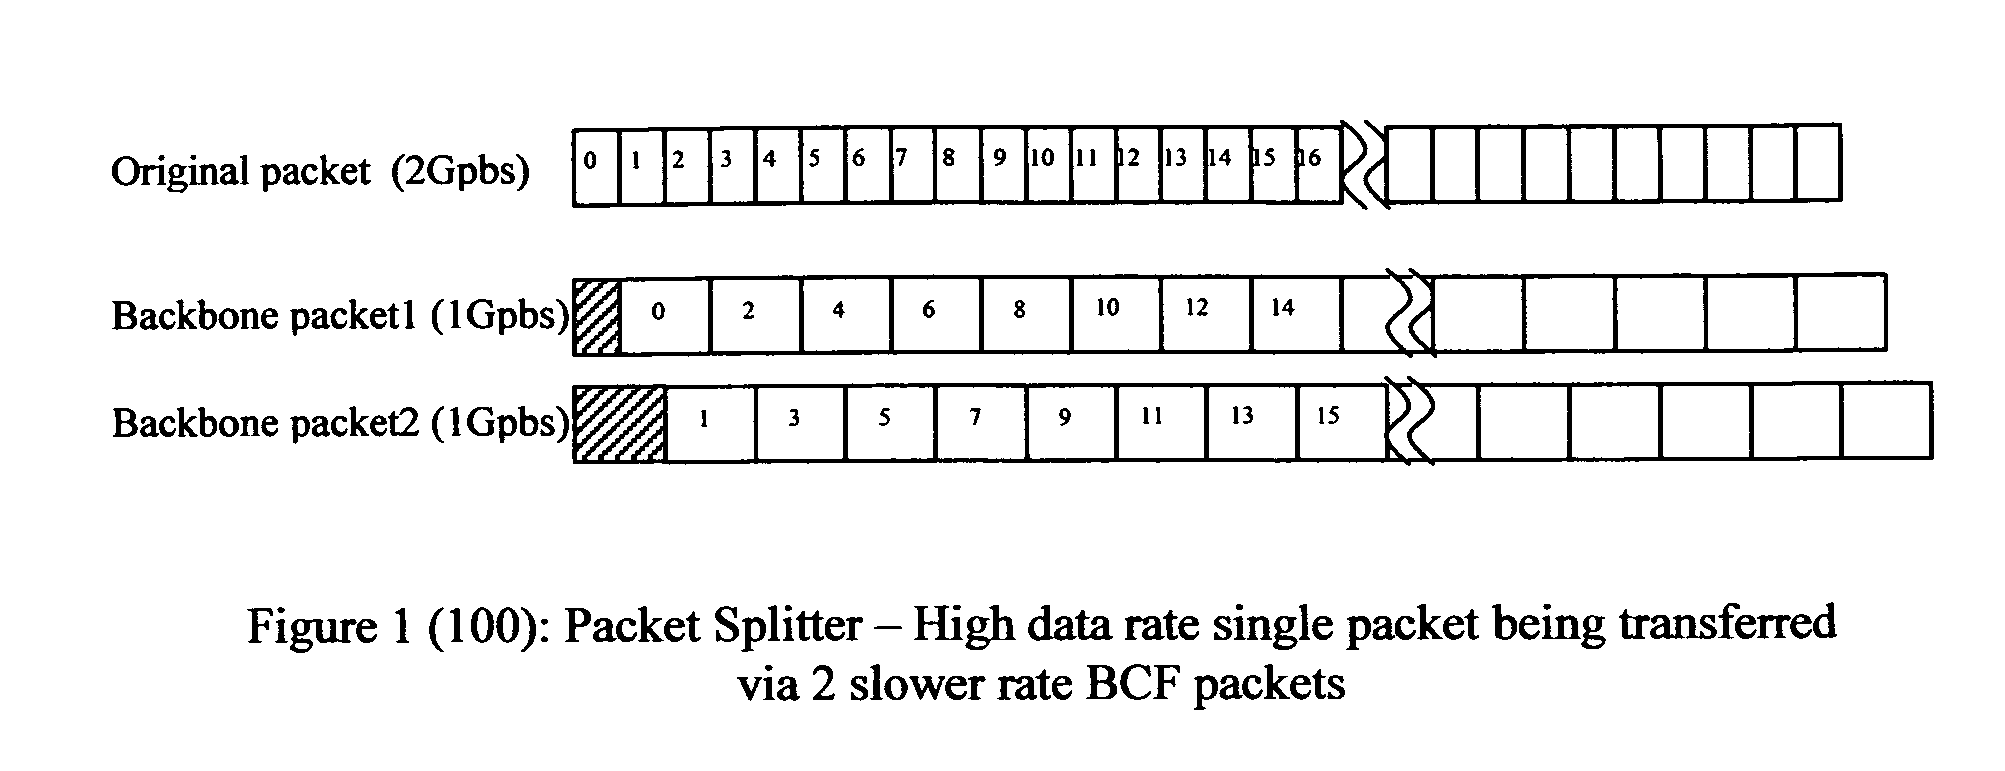 Method of constructing wireless high speed backbone connection that unifies various wired/wireless network clusters by means of employing the smart/adaptive antenna technique and dynamically creating concurrent data pipelines